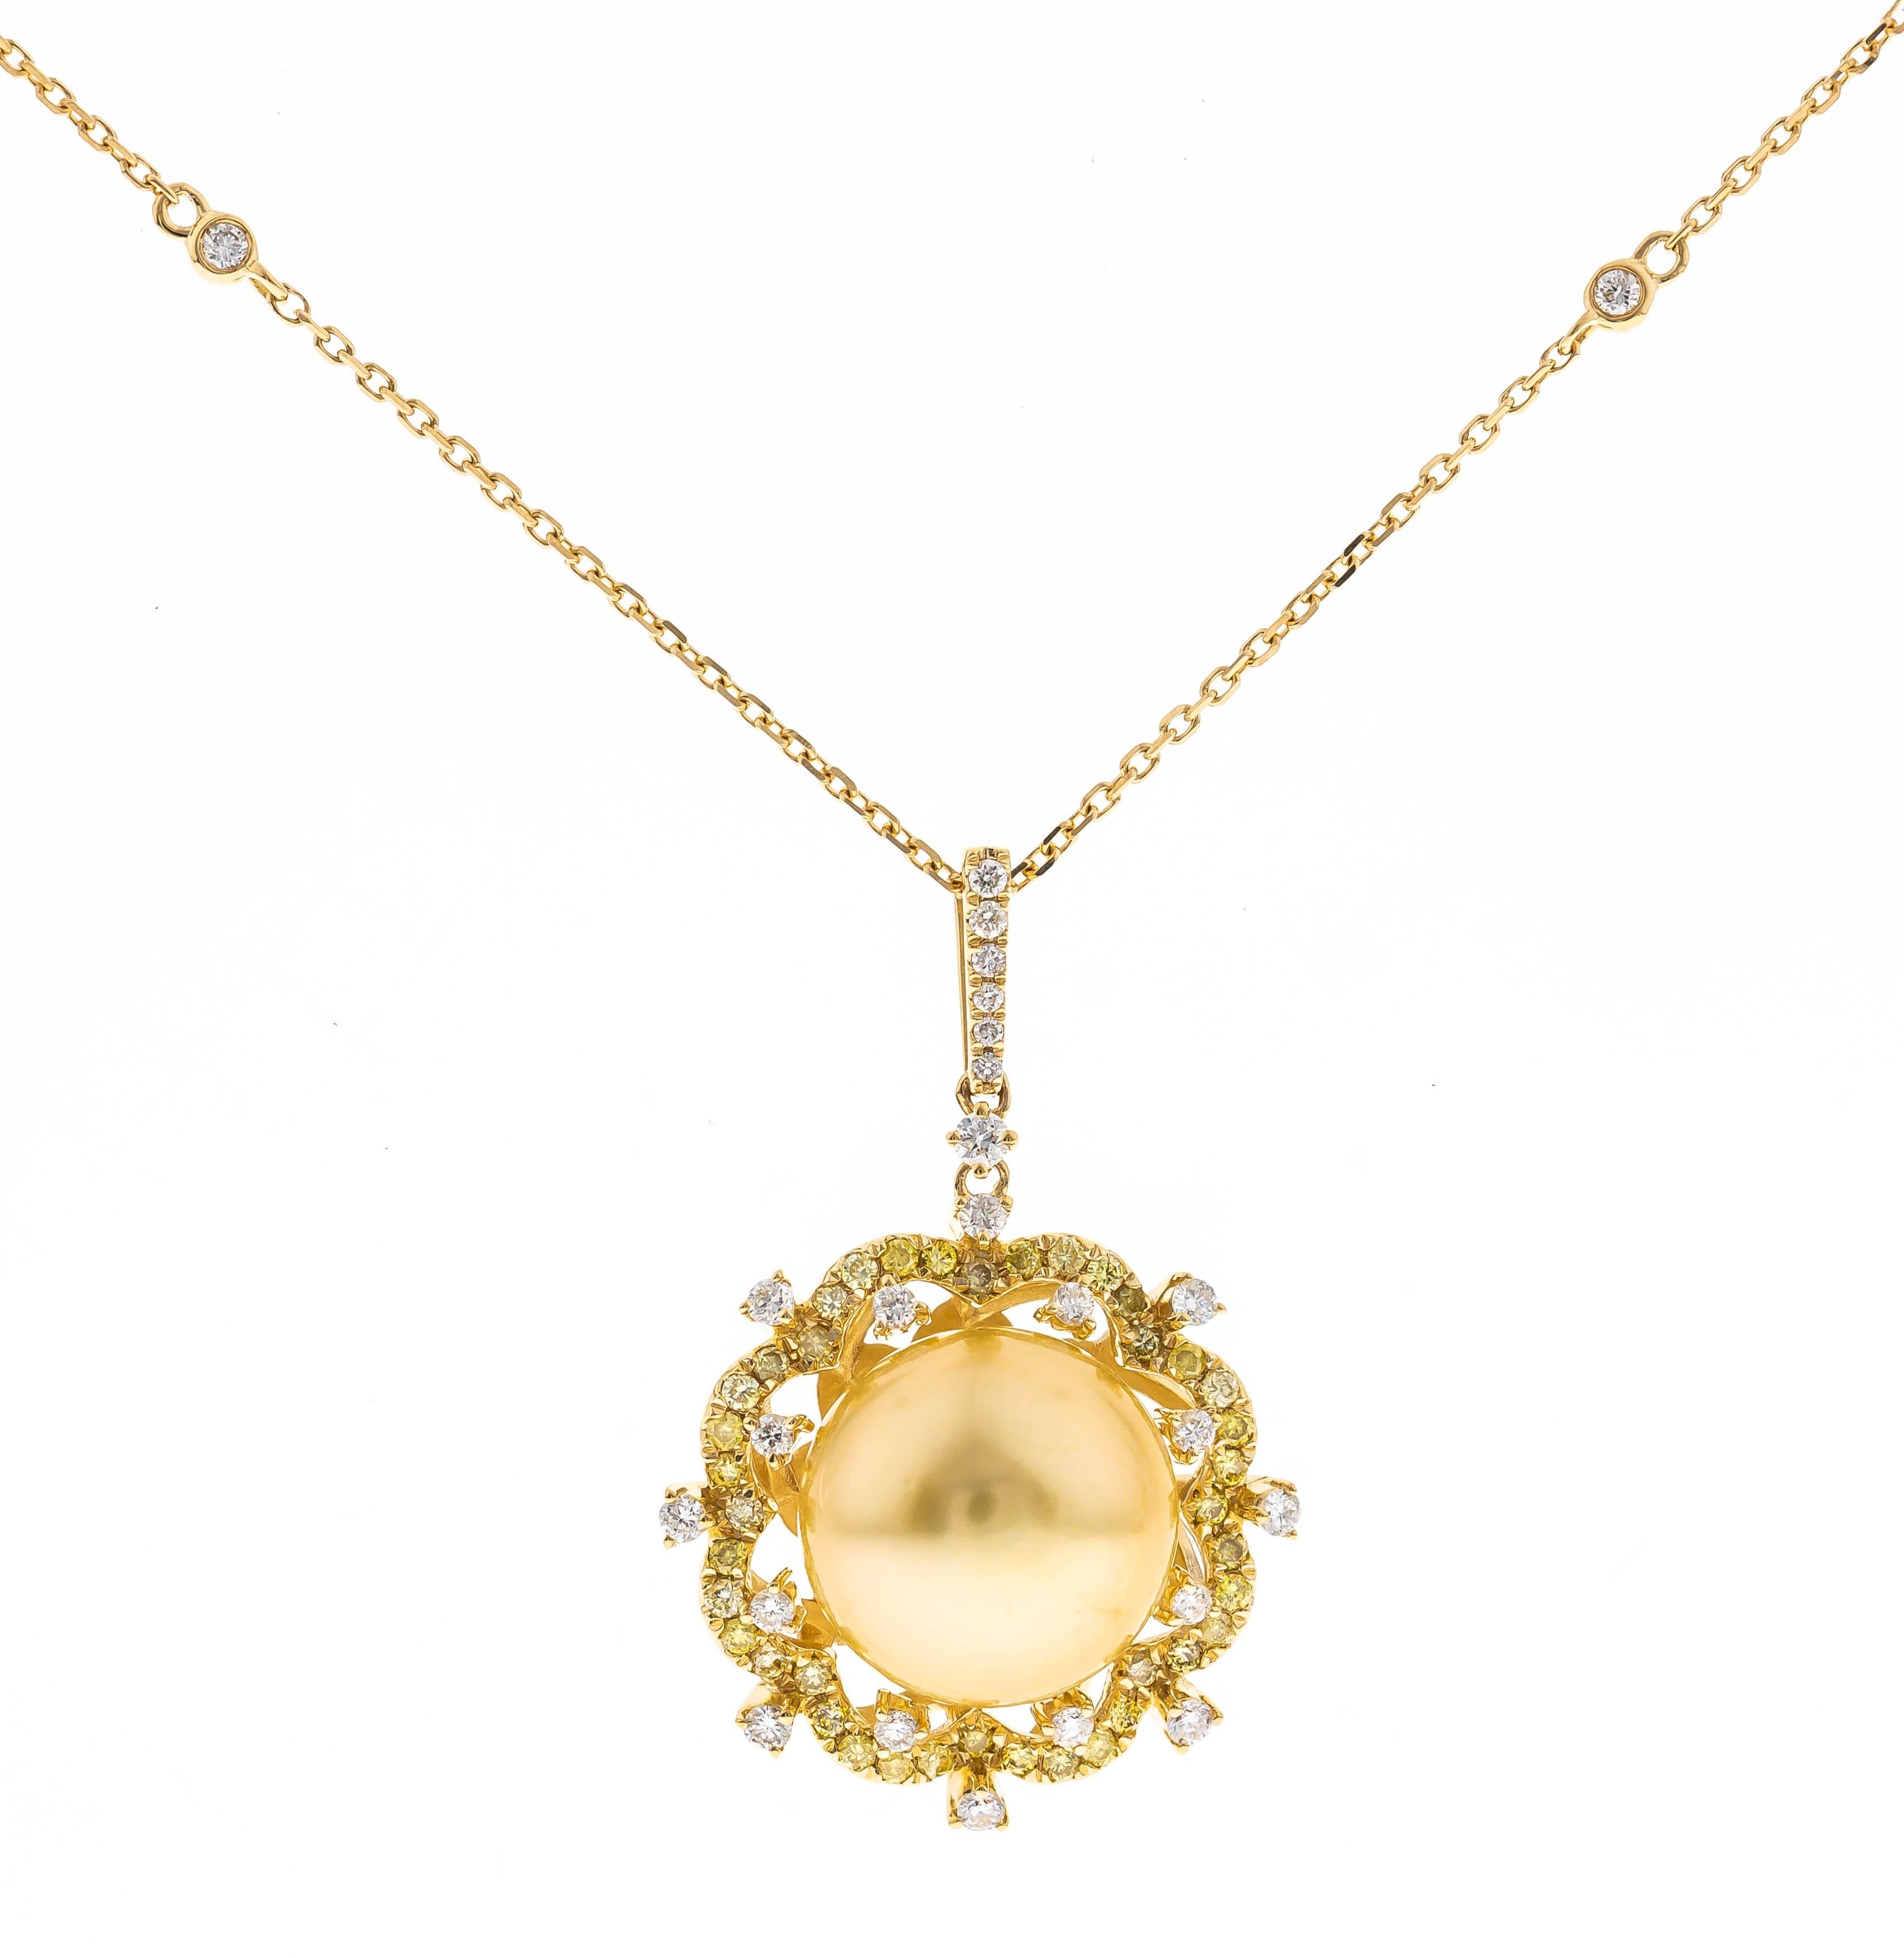 Round Cut 15.36 Carat Round Cab South Sea Pearl with Diamond Accents 18KY Gold Pendant For Sale